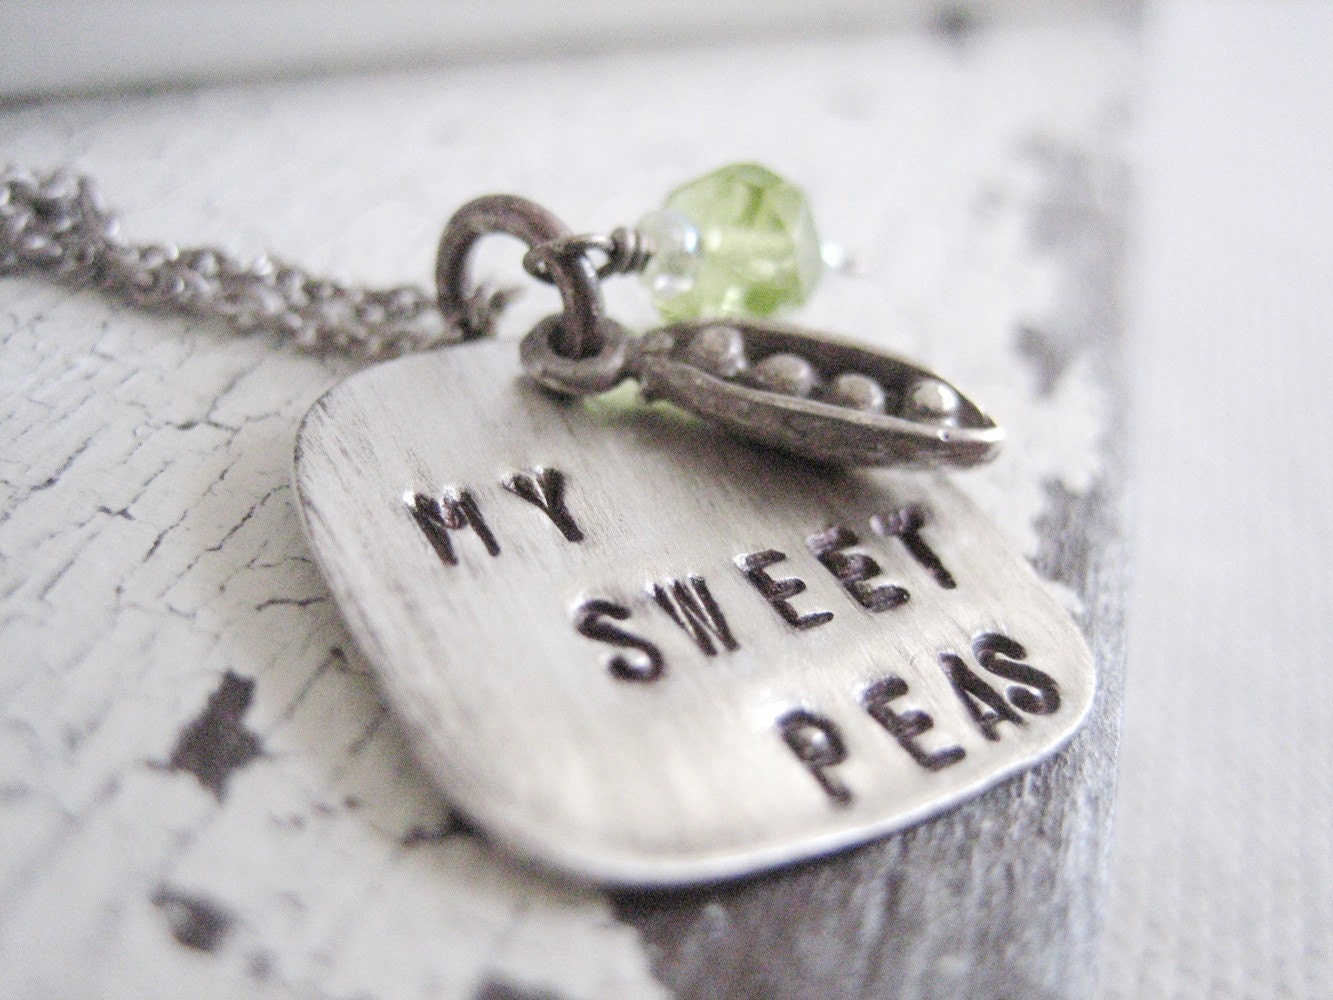 hand stamped jewelry, my sweet peas necklace.